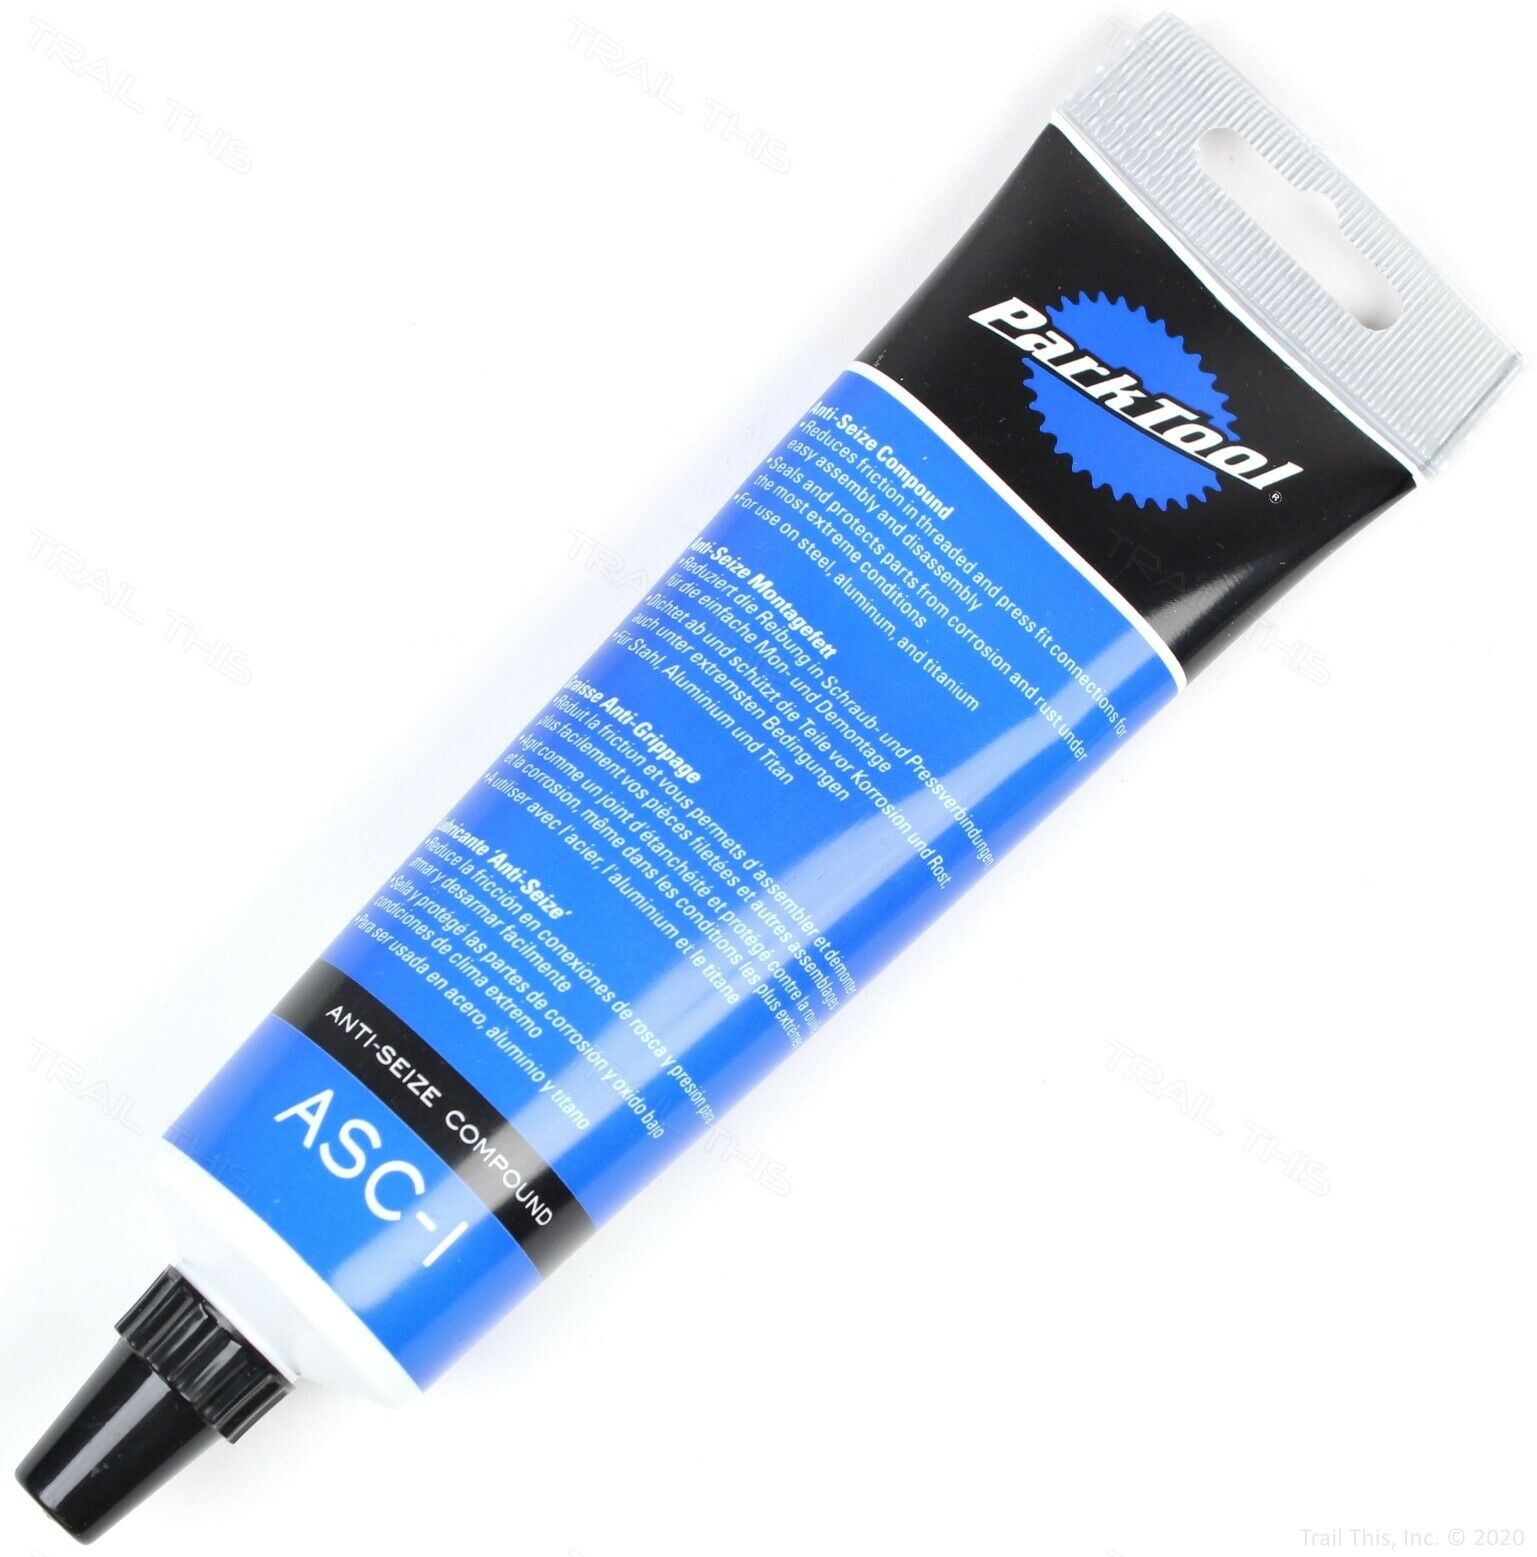 Park Tool Asc-1 Anti-seize Bicycle Assembly Compound 4oz Tube Seals & Protects